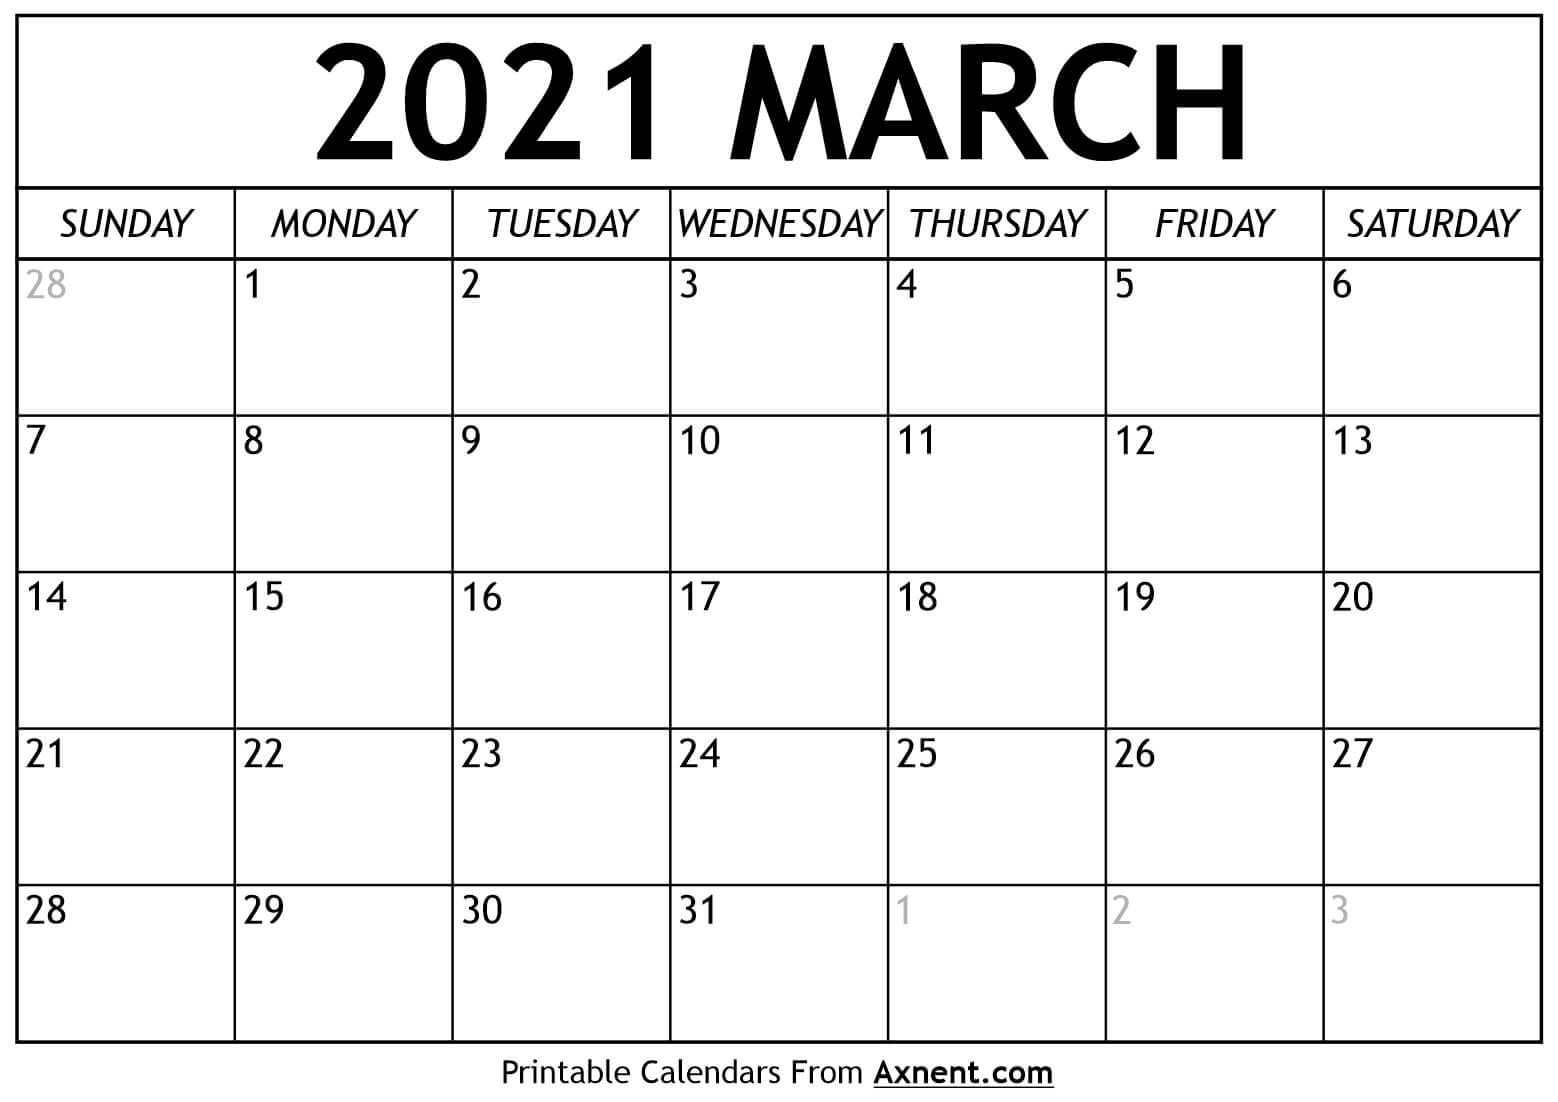 Printable March 2021 Calendar Template - Time Management